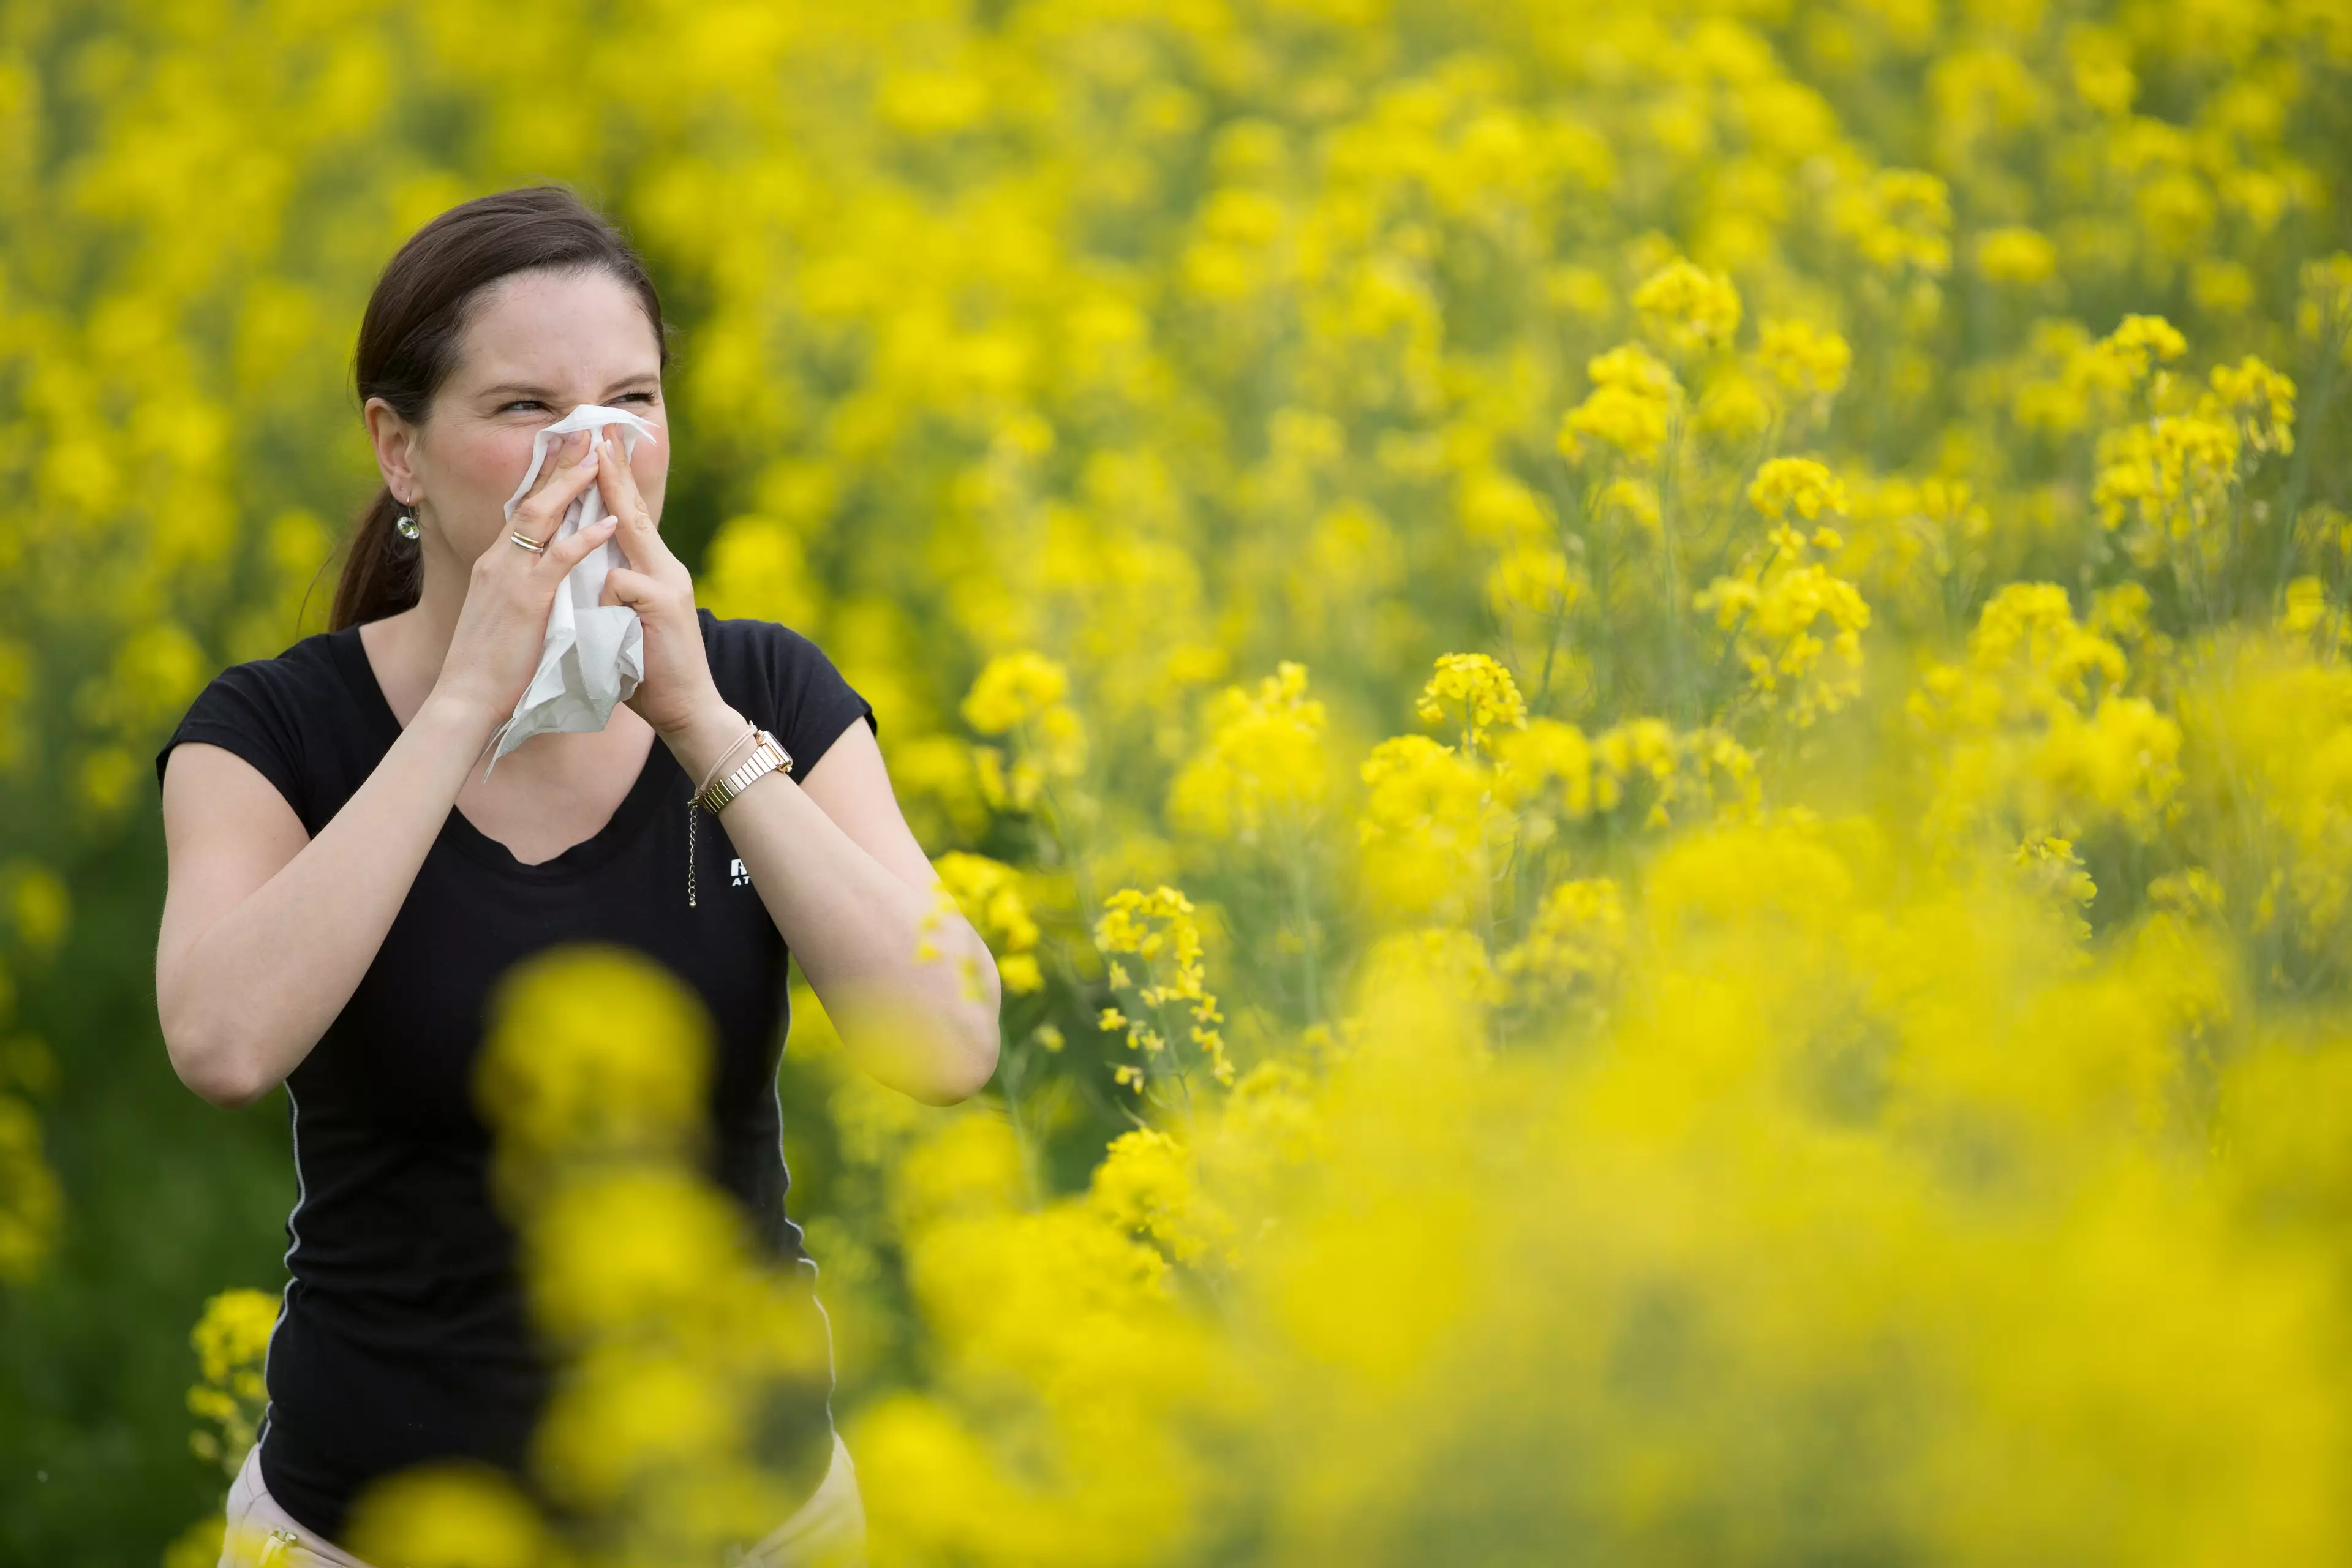 Storms could make hay fever symptoms even worse.